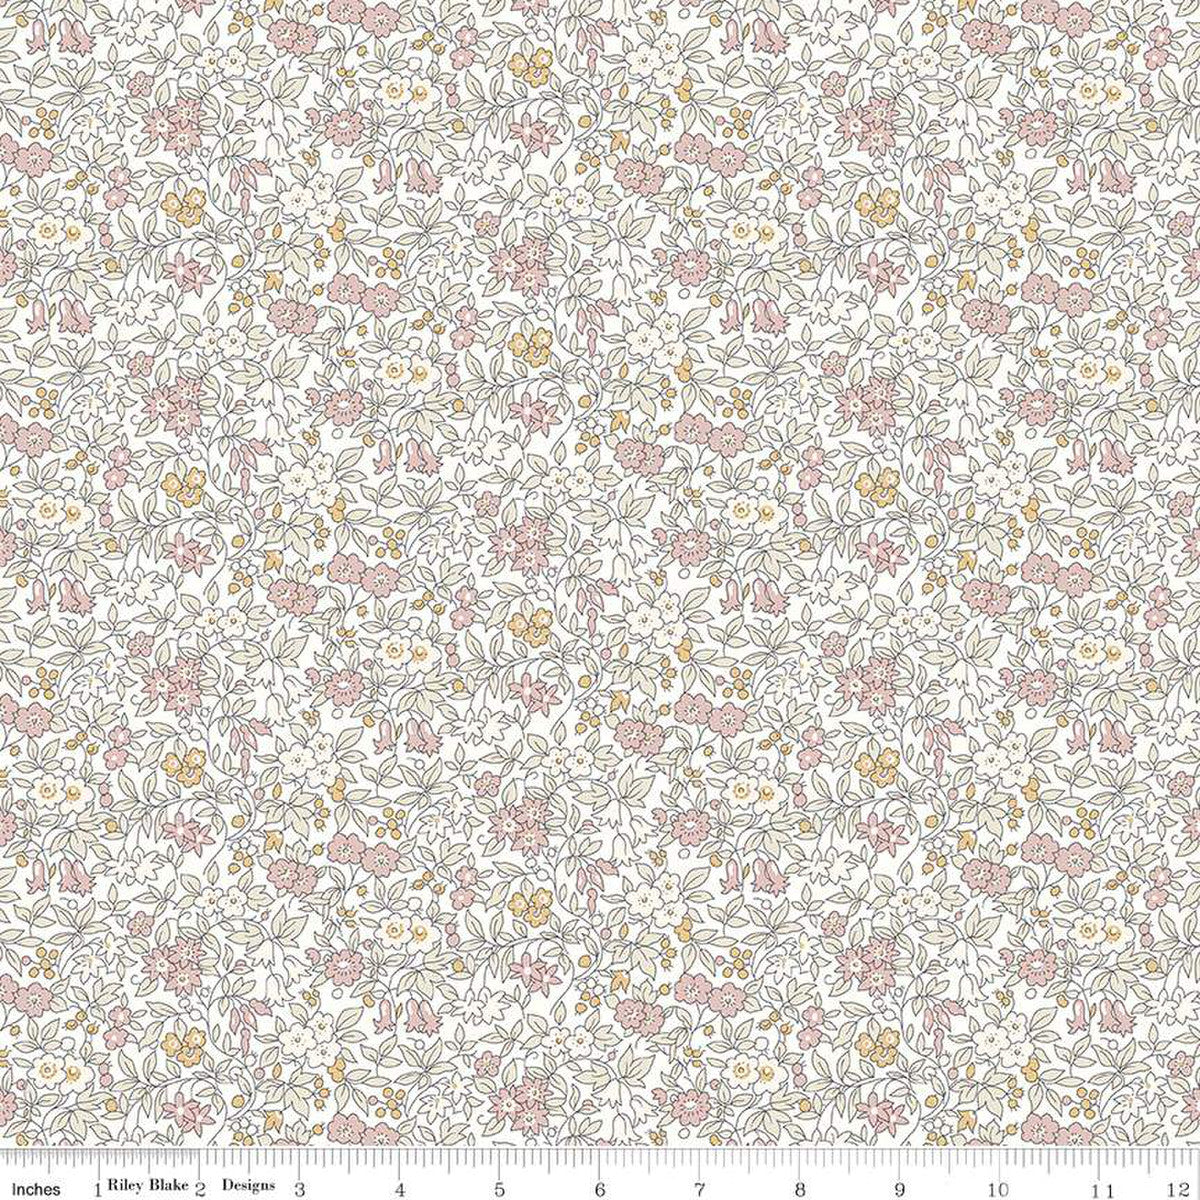 Flower Show Pebble Forget Me Not Blossom A Fabric - By the yard